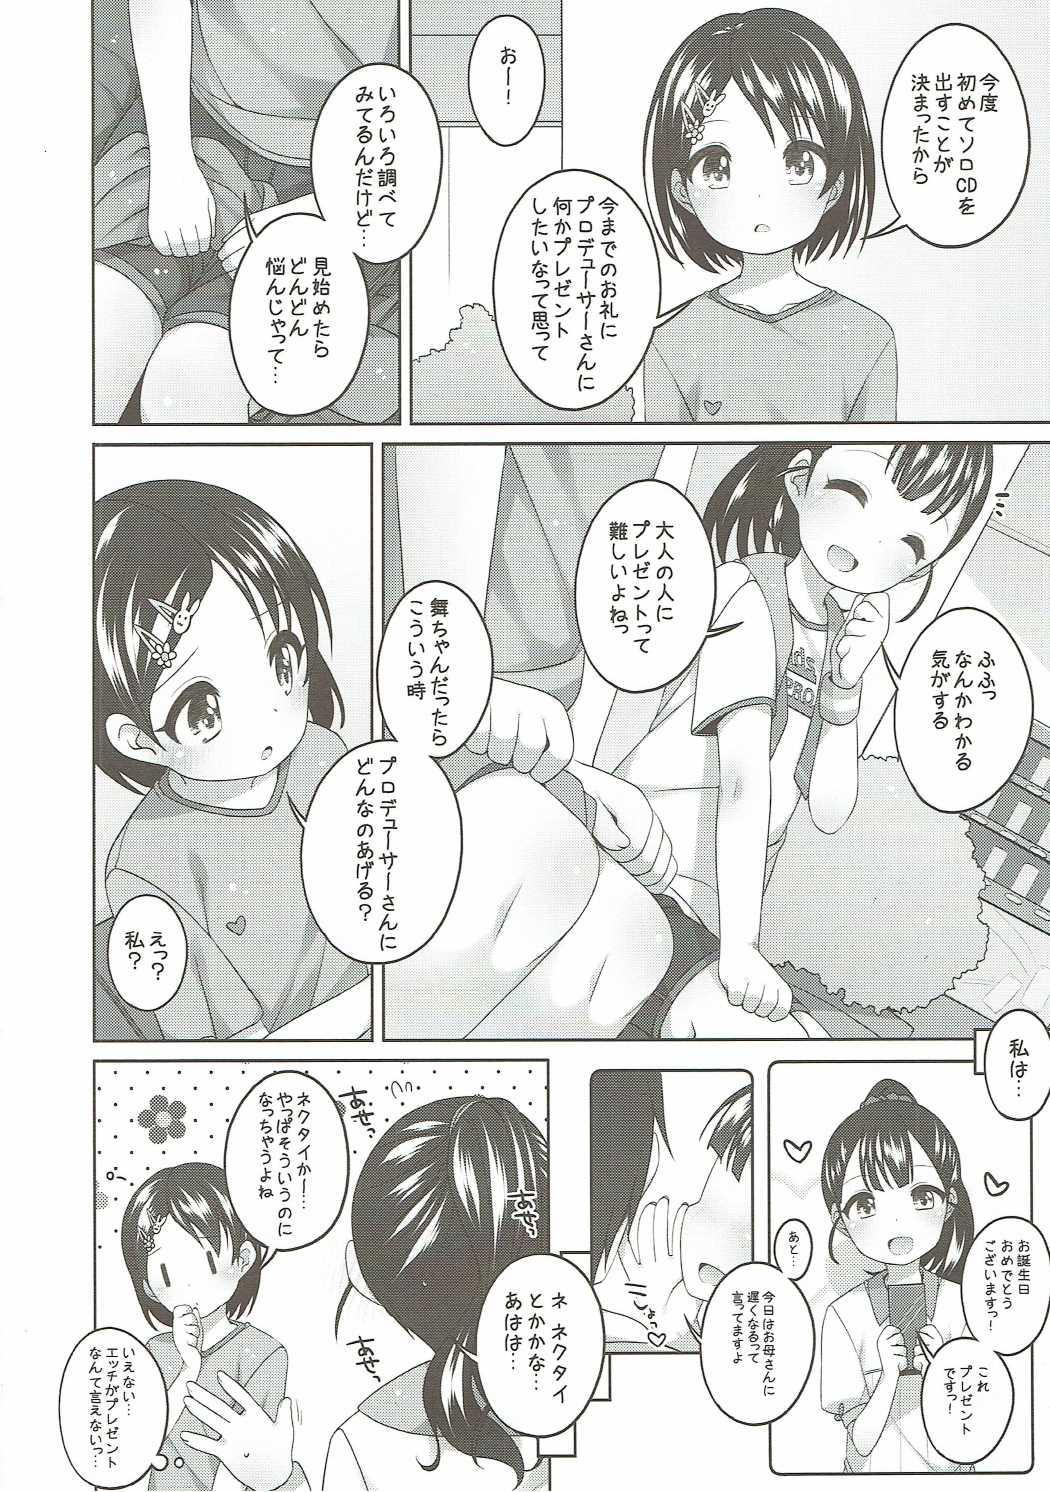 Bwc Ganbare! Chie-chan - The idolmaster Chica - Page 5